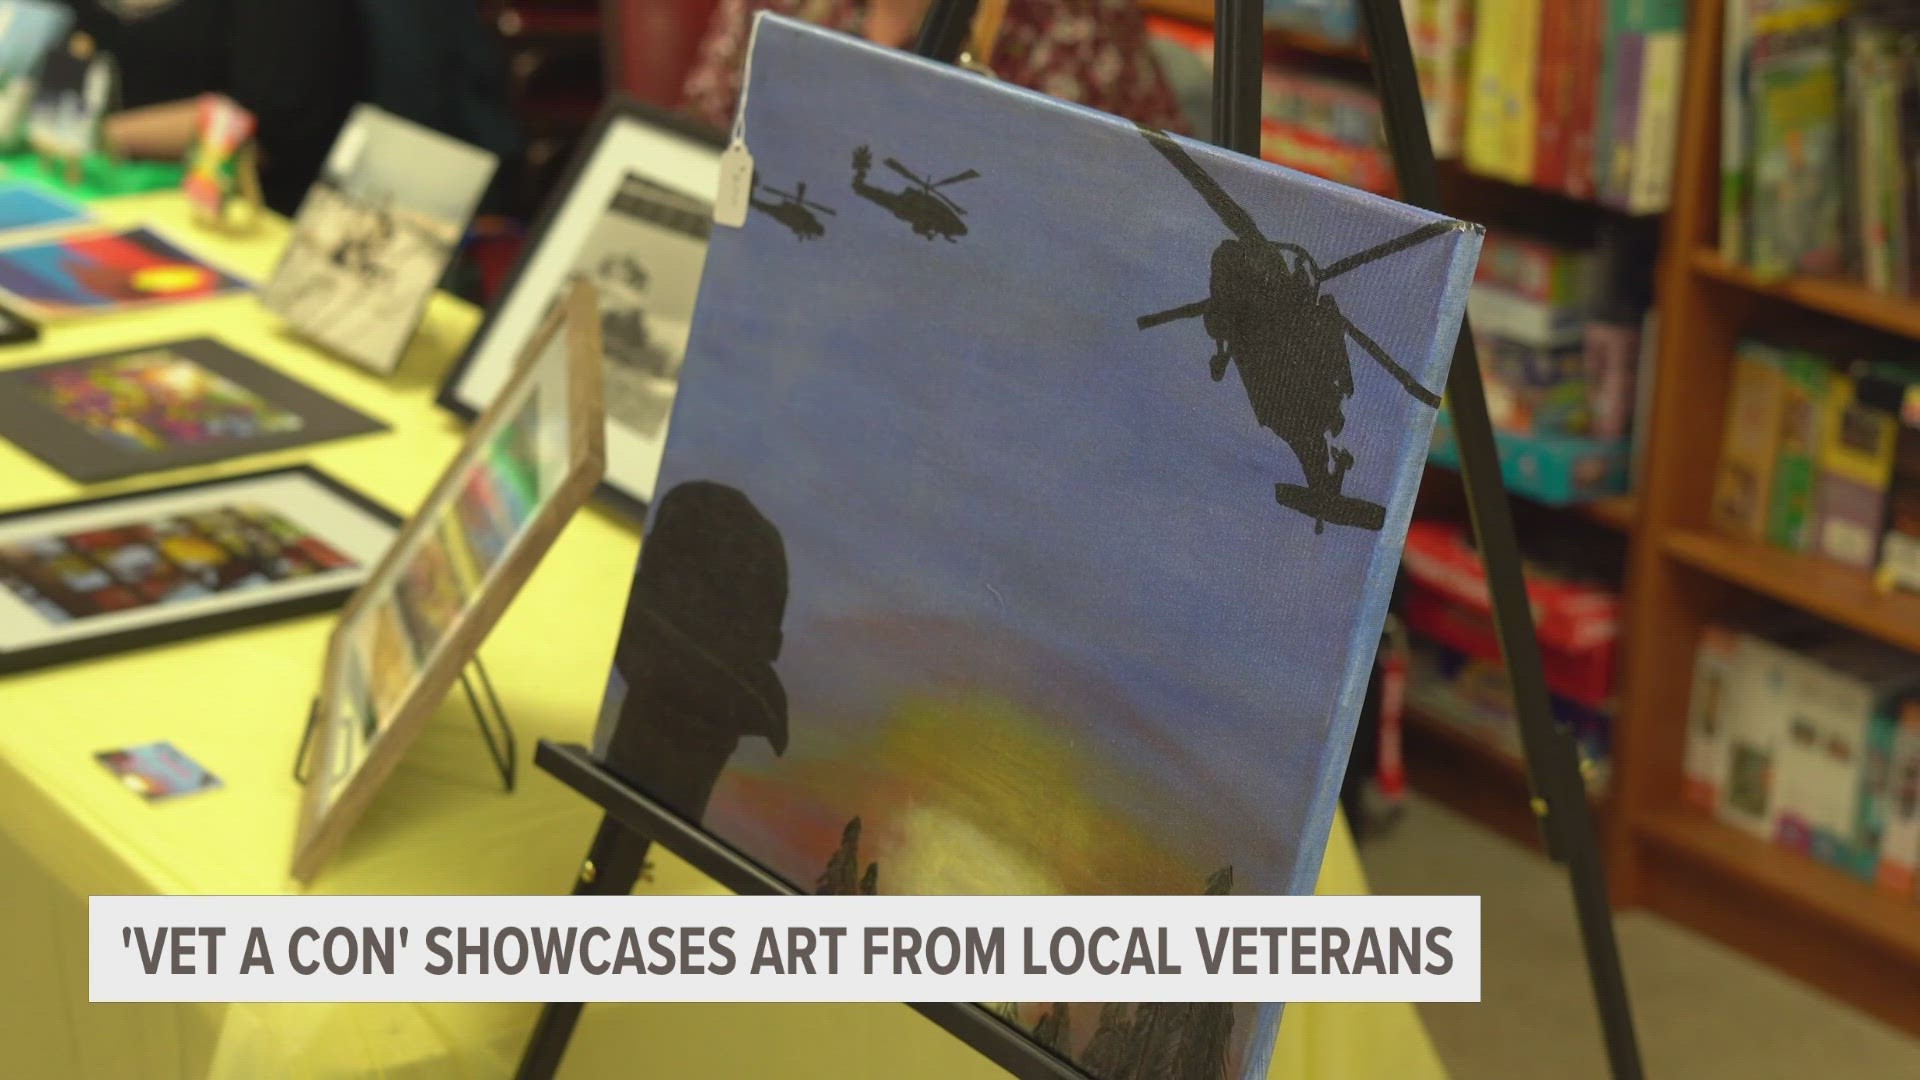 A West Michigan organization is finding a creative way to highlight those who served.